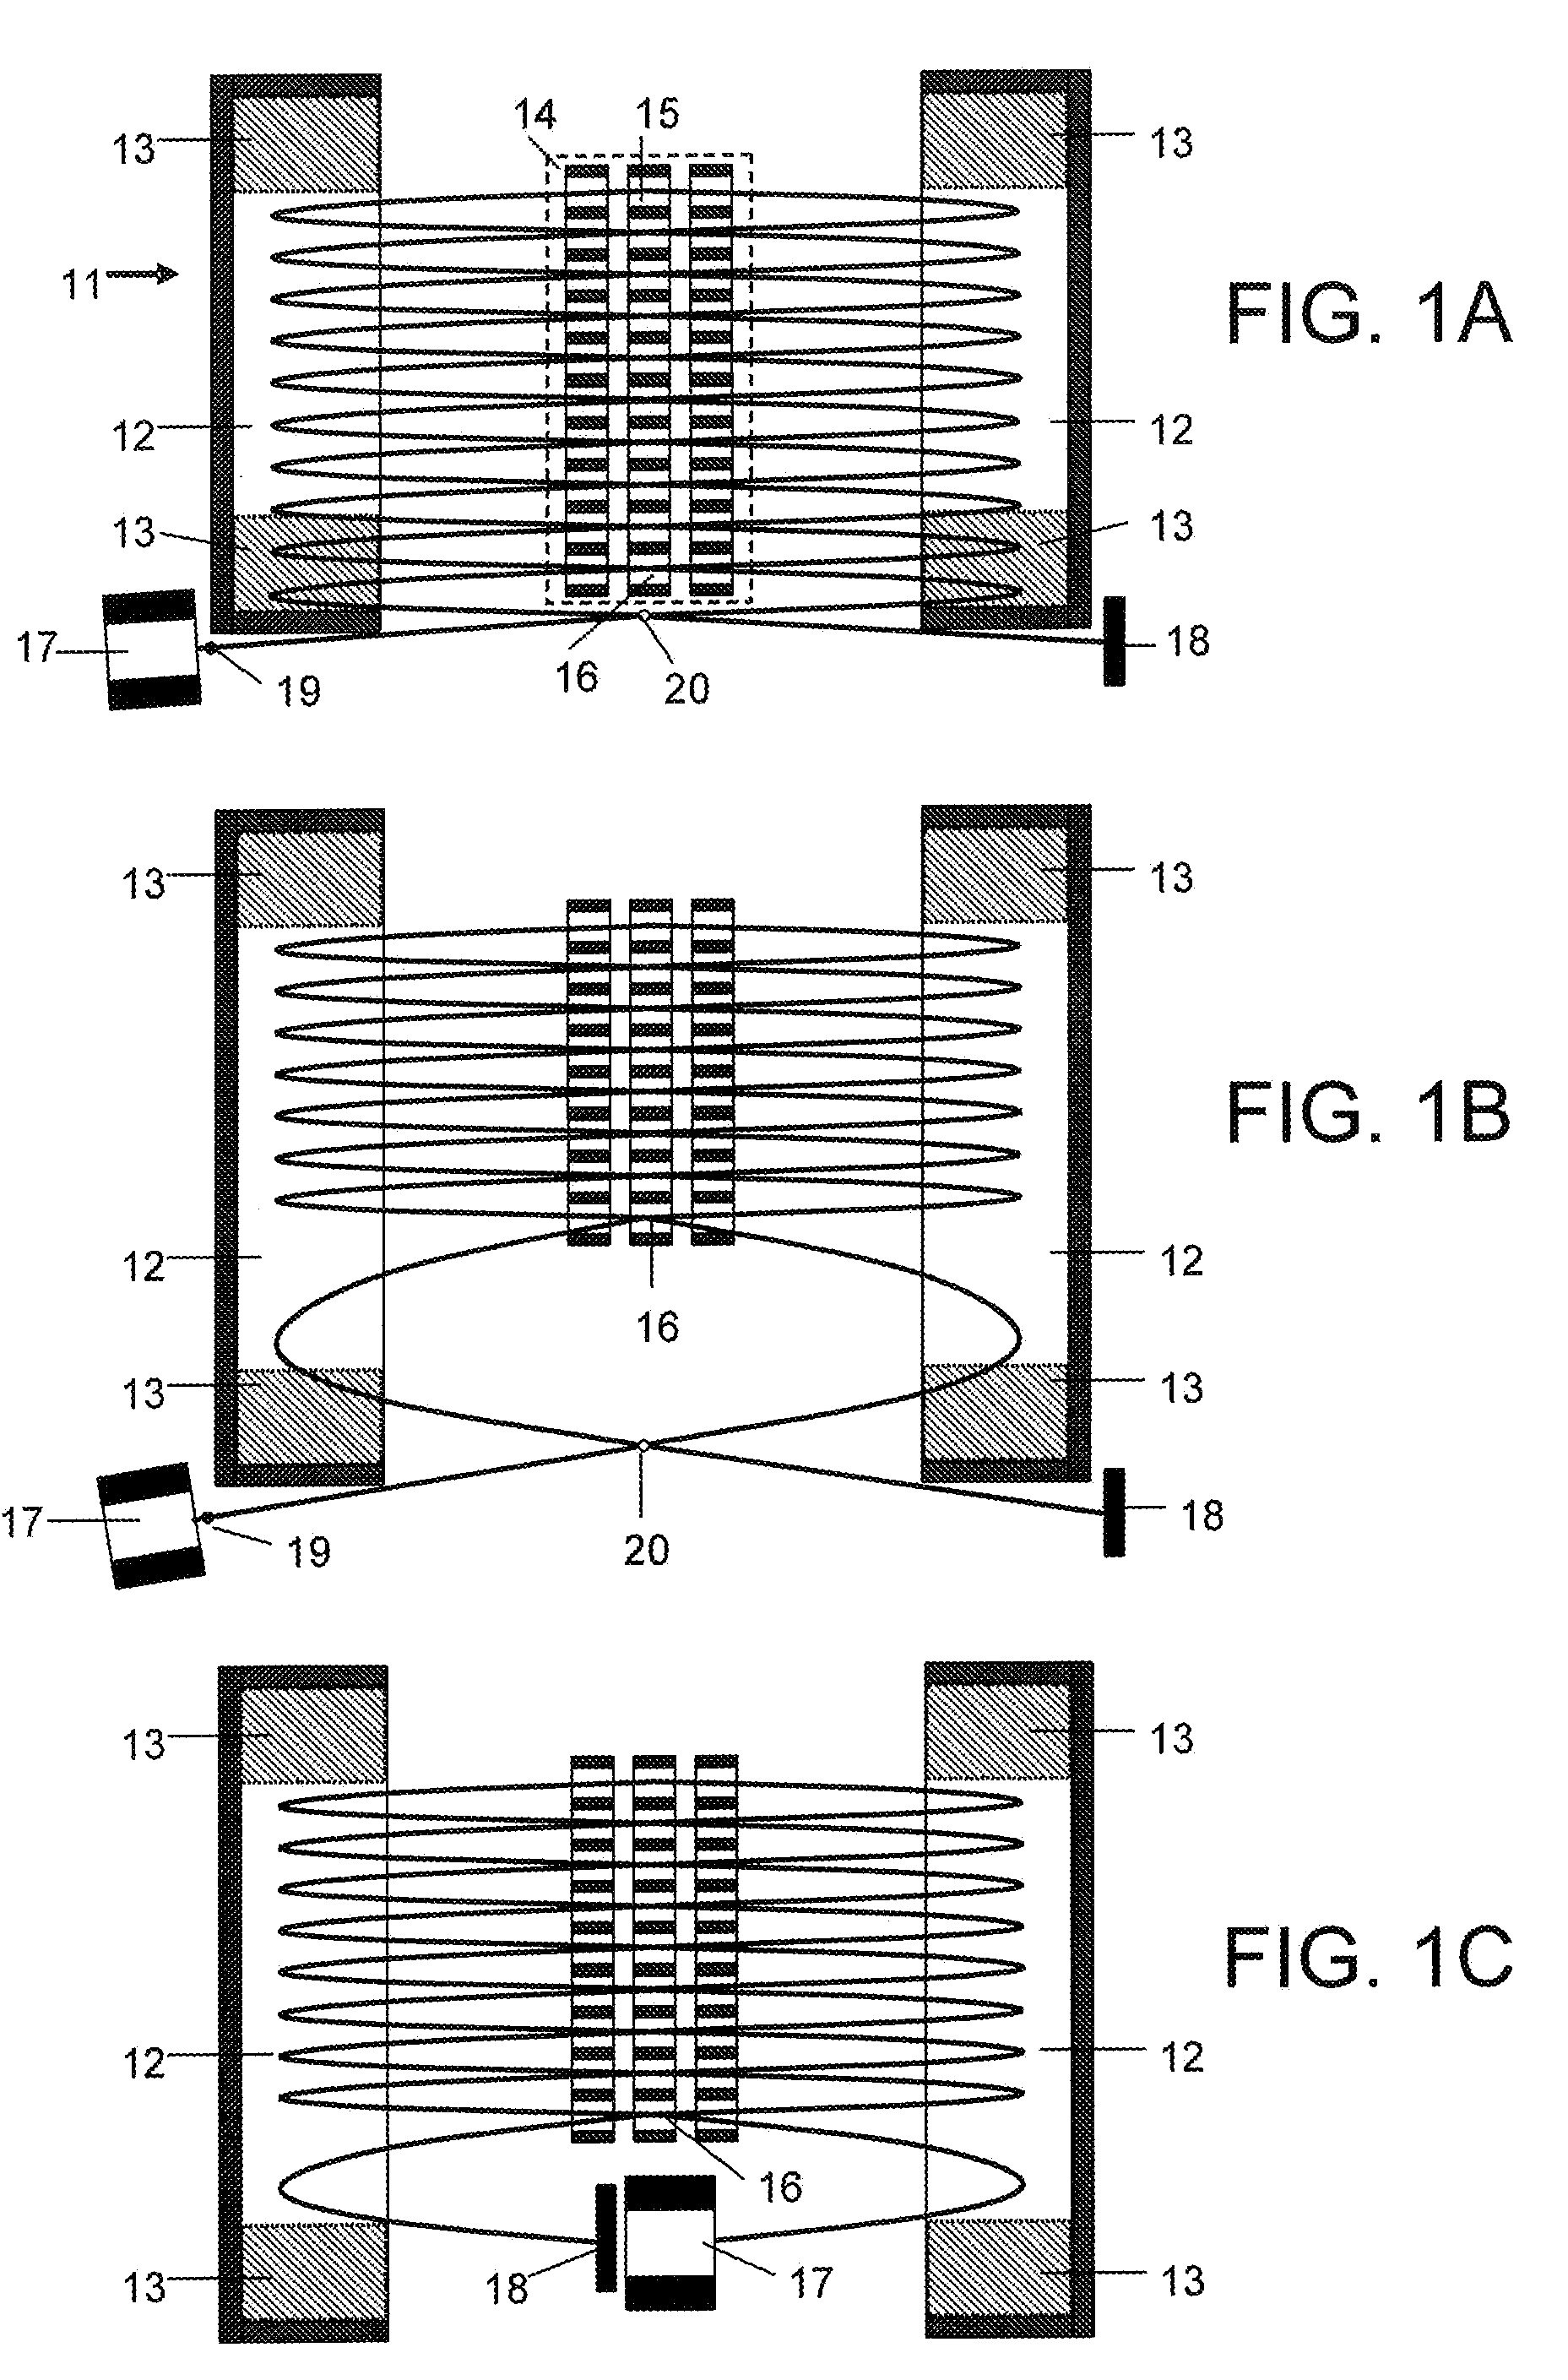 Multi-reflecting time-of-flight mass spectrometer with isochronous curved ion interface